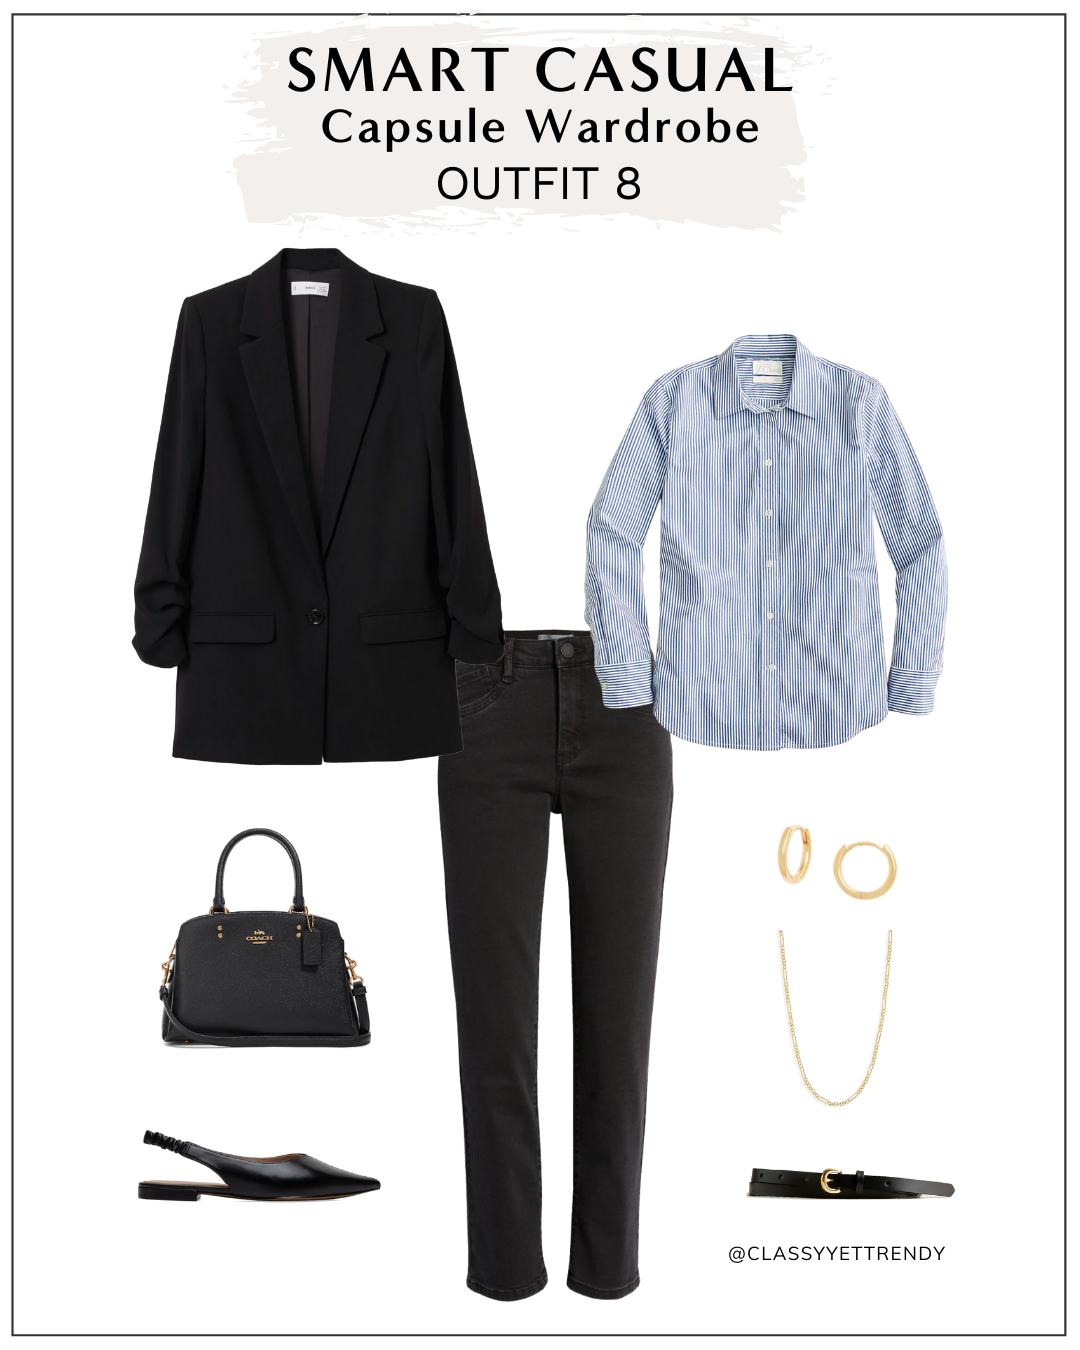 Four Easy Spring Business Casual Outfit Ideas + The NEW 2nd Edition Spring Business  Casual Starter Kit Wardrobe Guide is NOW AVAILABLE! - Putting Me Together